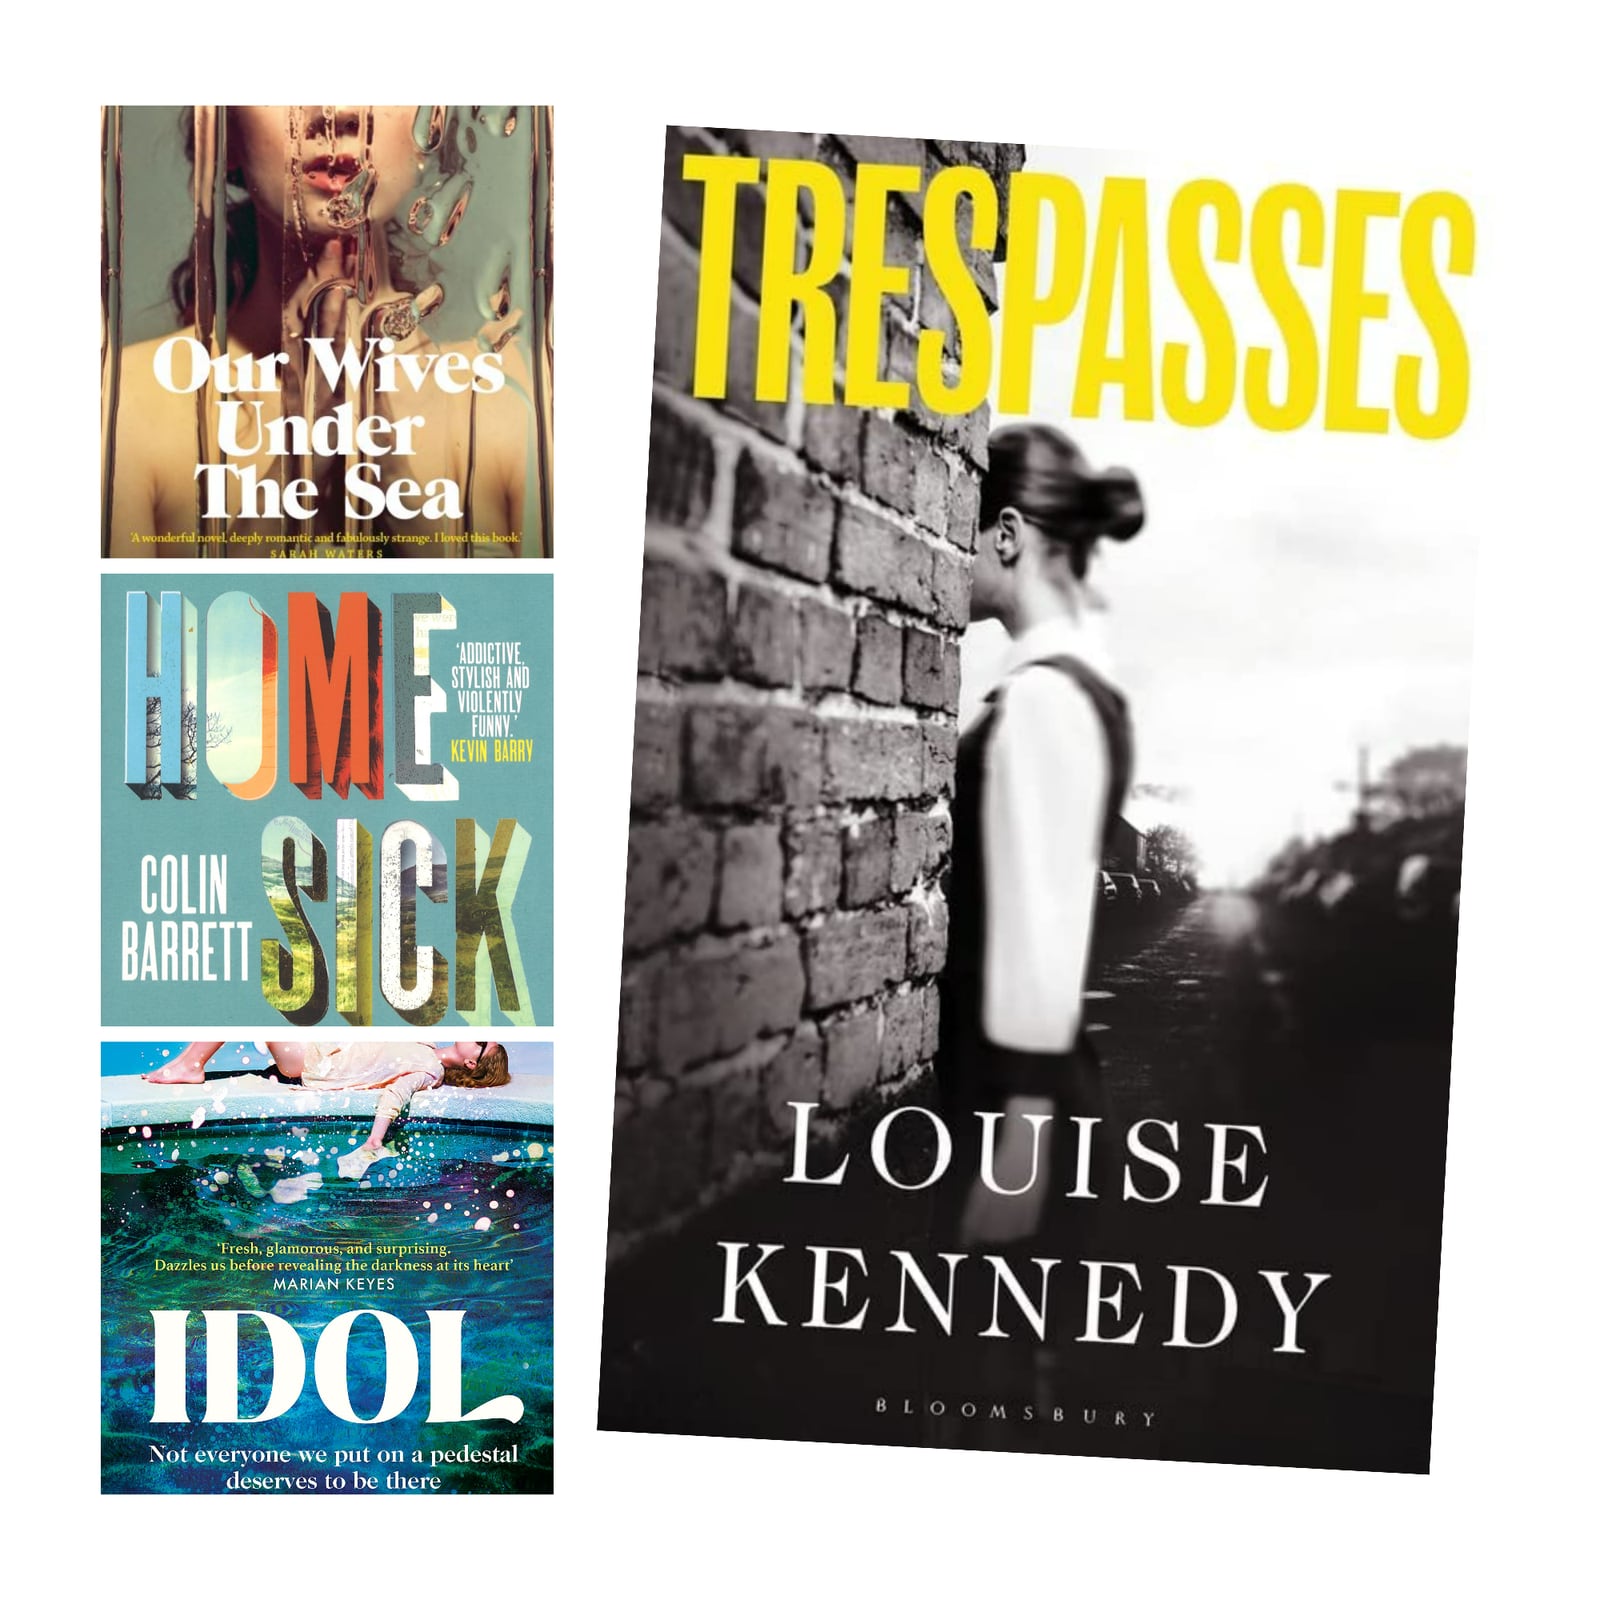 Among the year's best fiction are Our Wives Under the Sea, Homesickness, Idol and Trespass